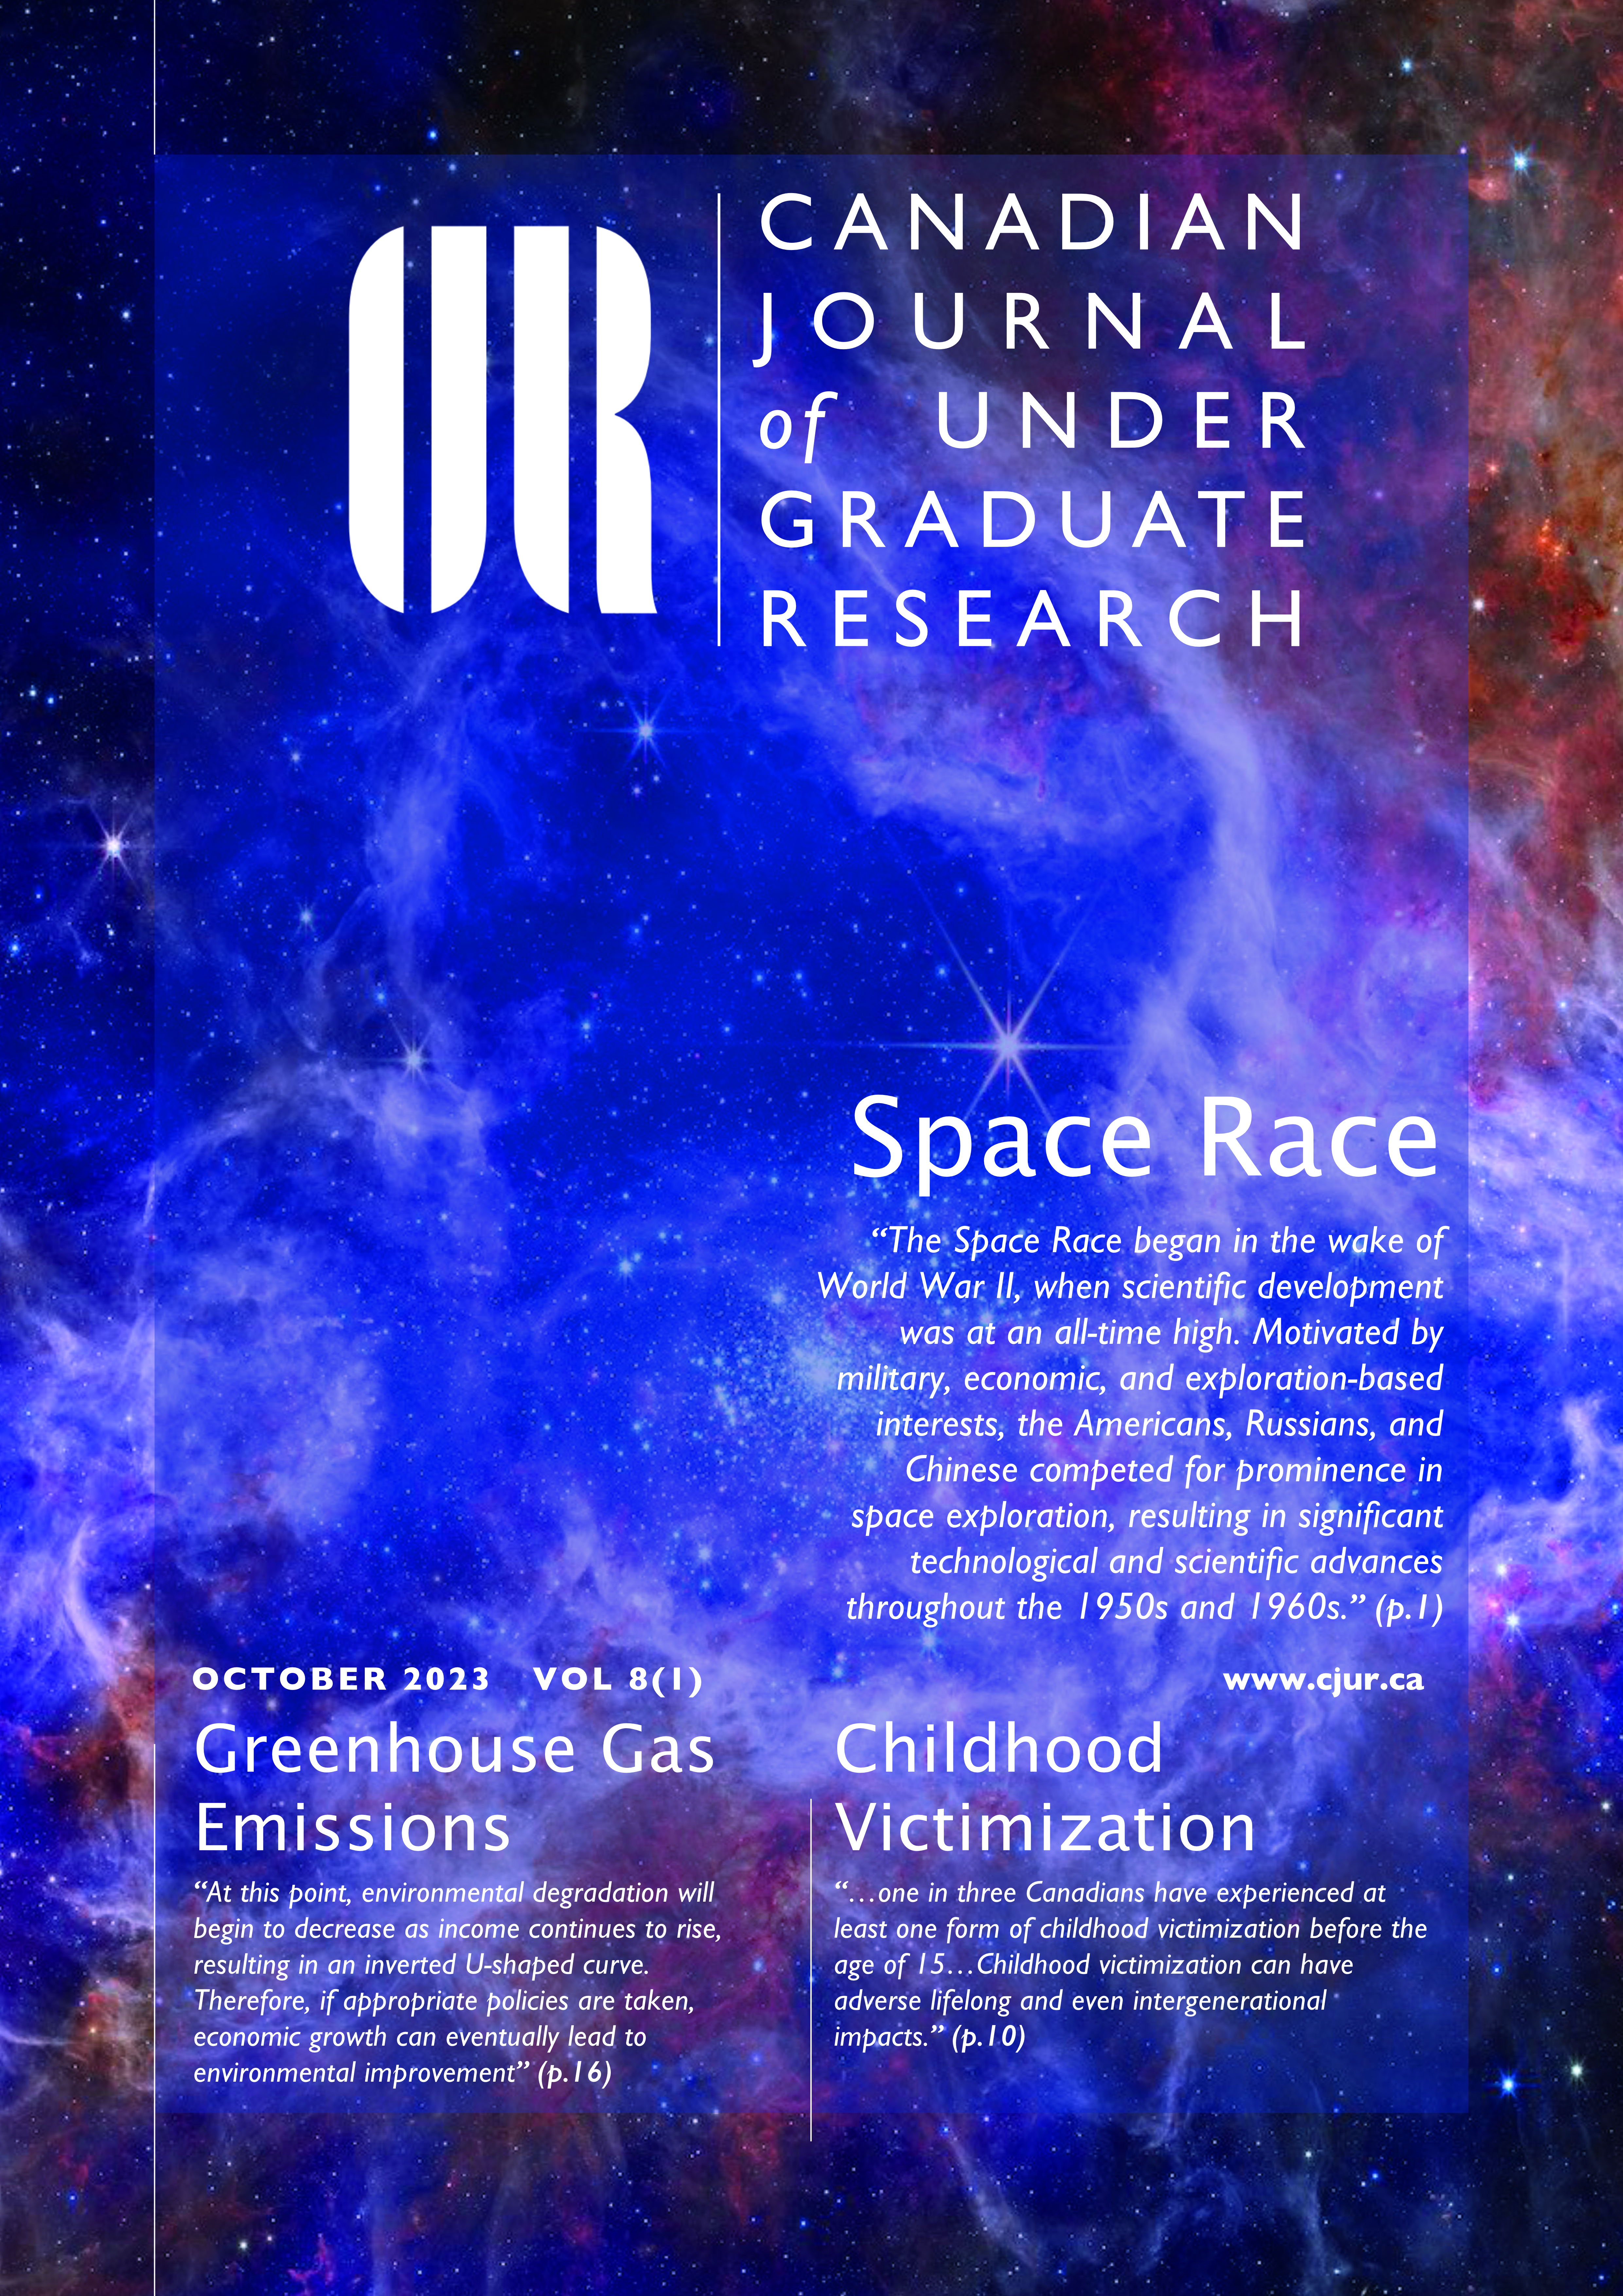 space race research paper topics